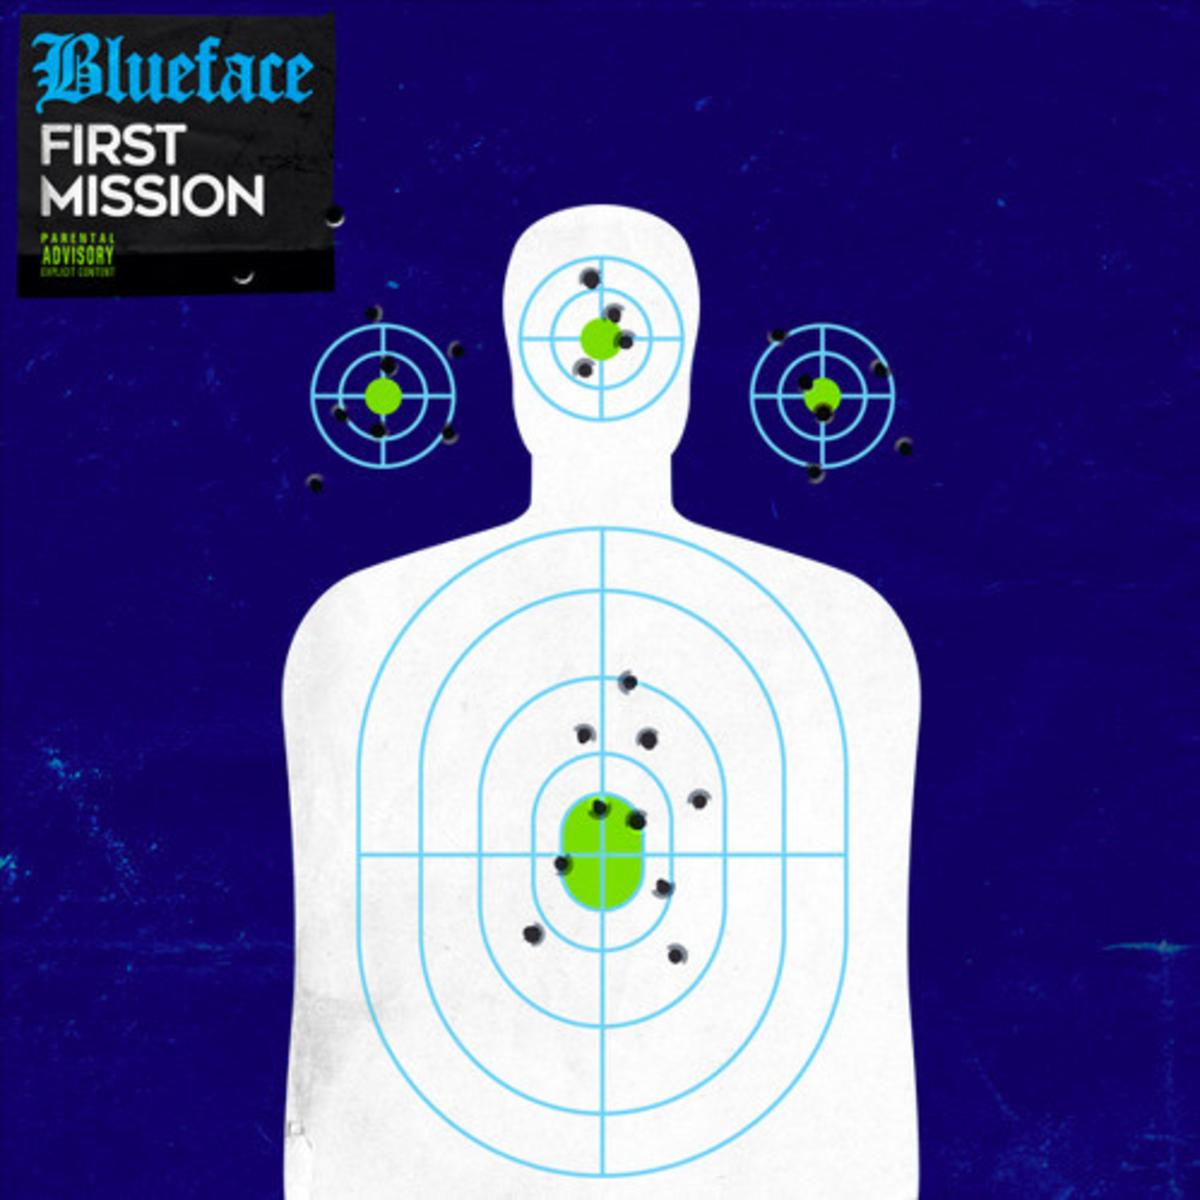 Blueface Goes Rambo On “First Mission”